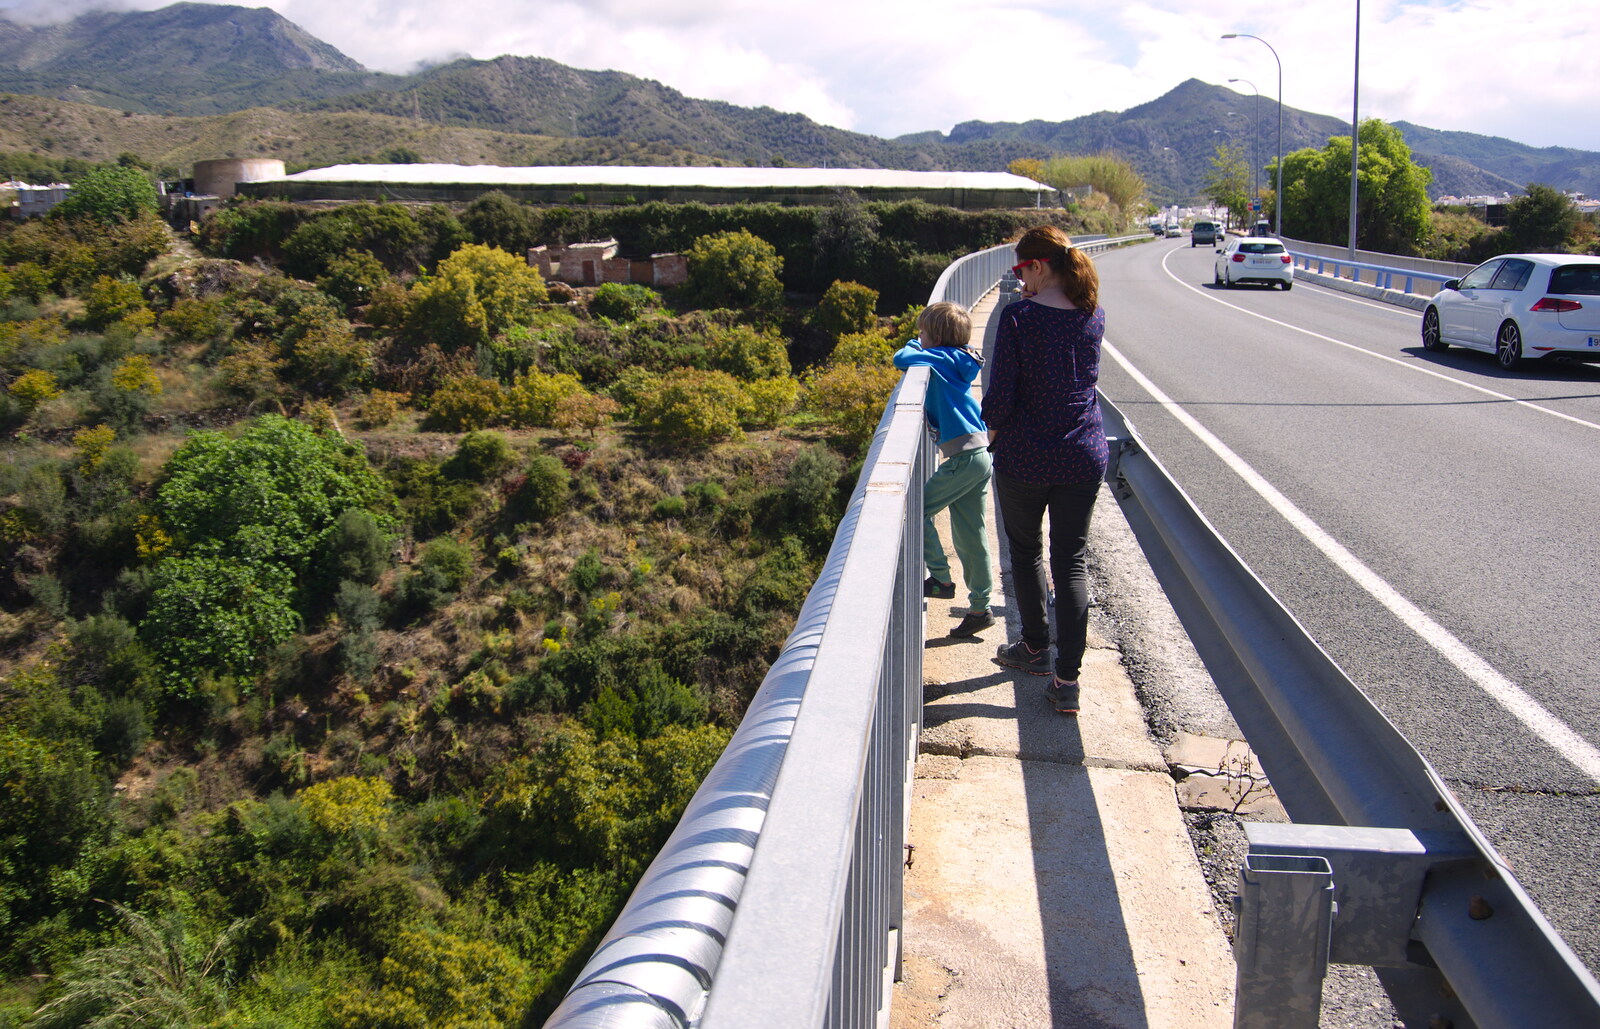 Harry and Isobel on a road bridge from The Caves of Nerja, and Frigiliana, Andalusia, Spain - 18th April 2019